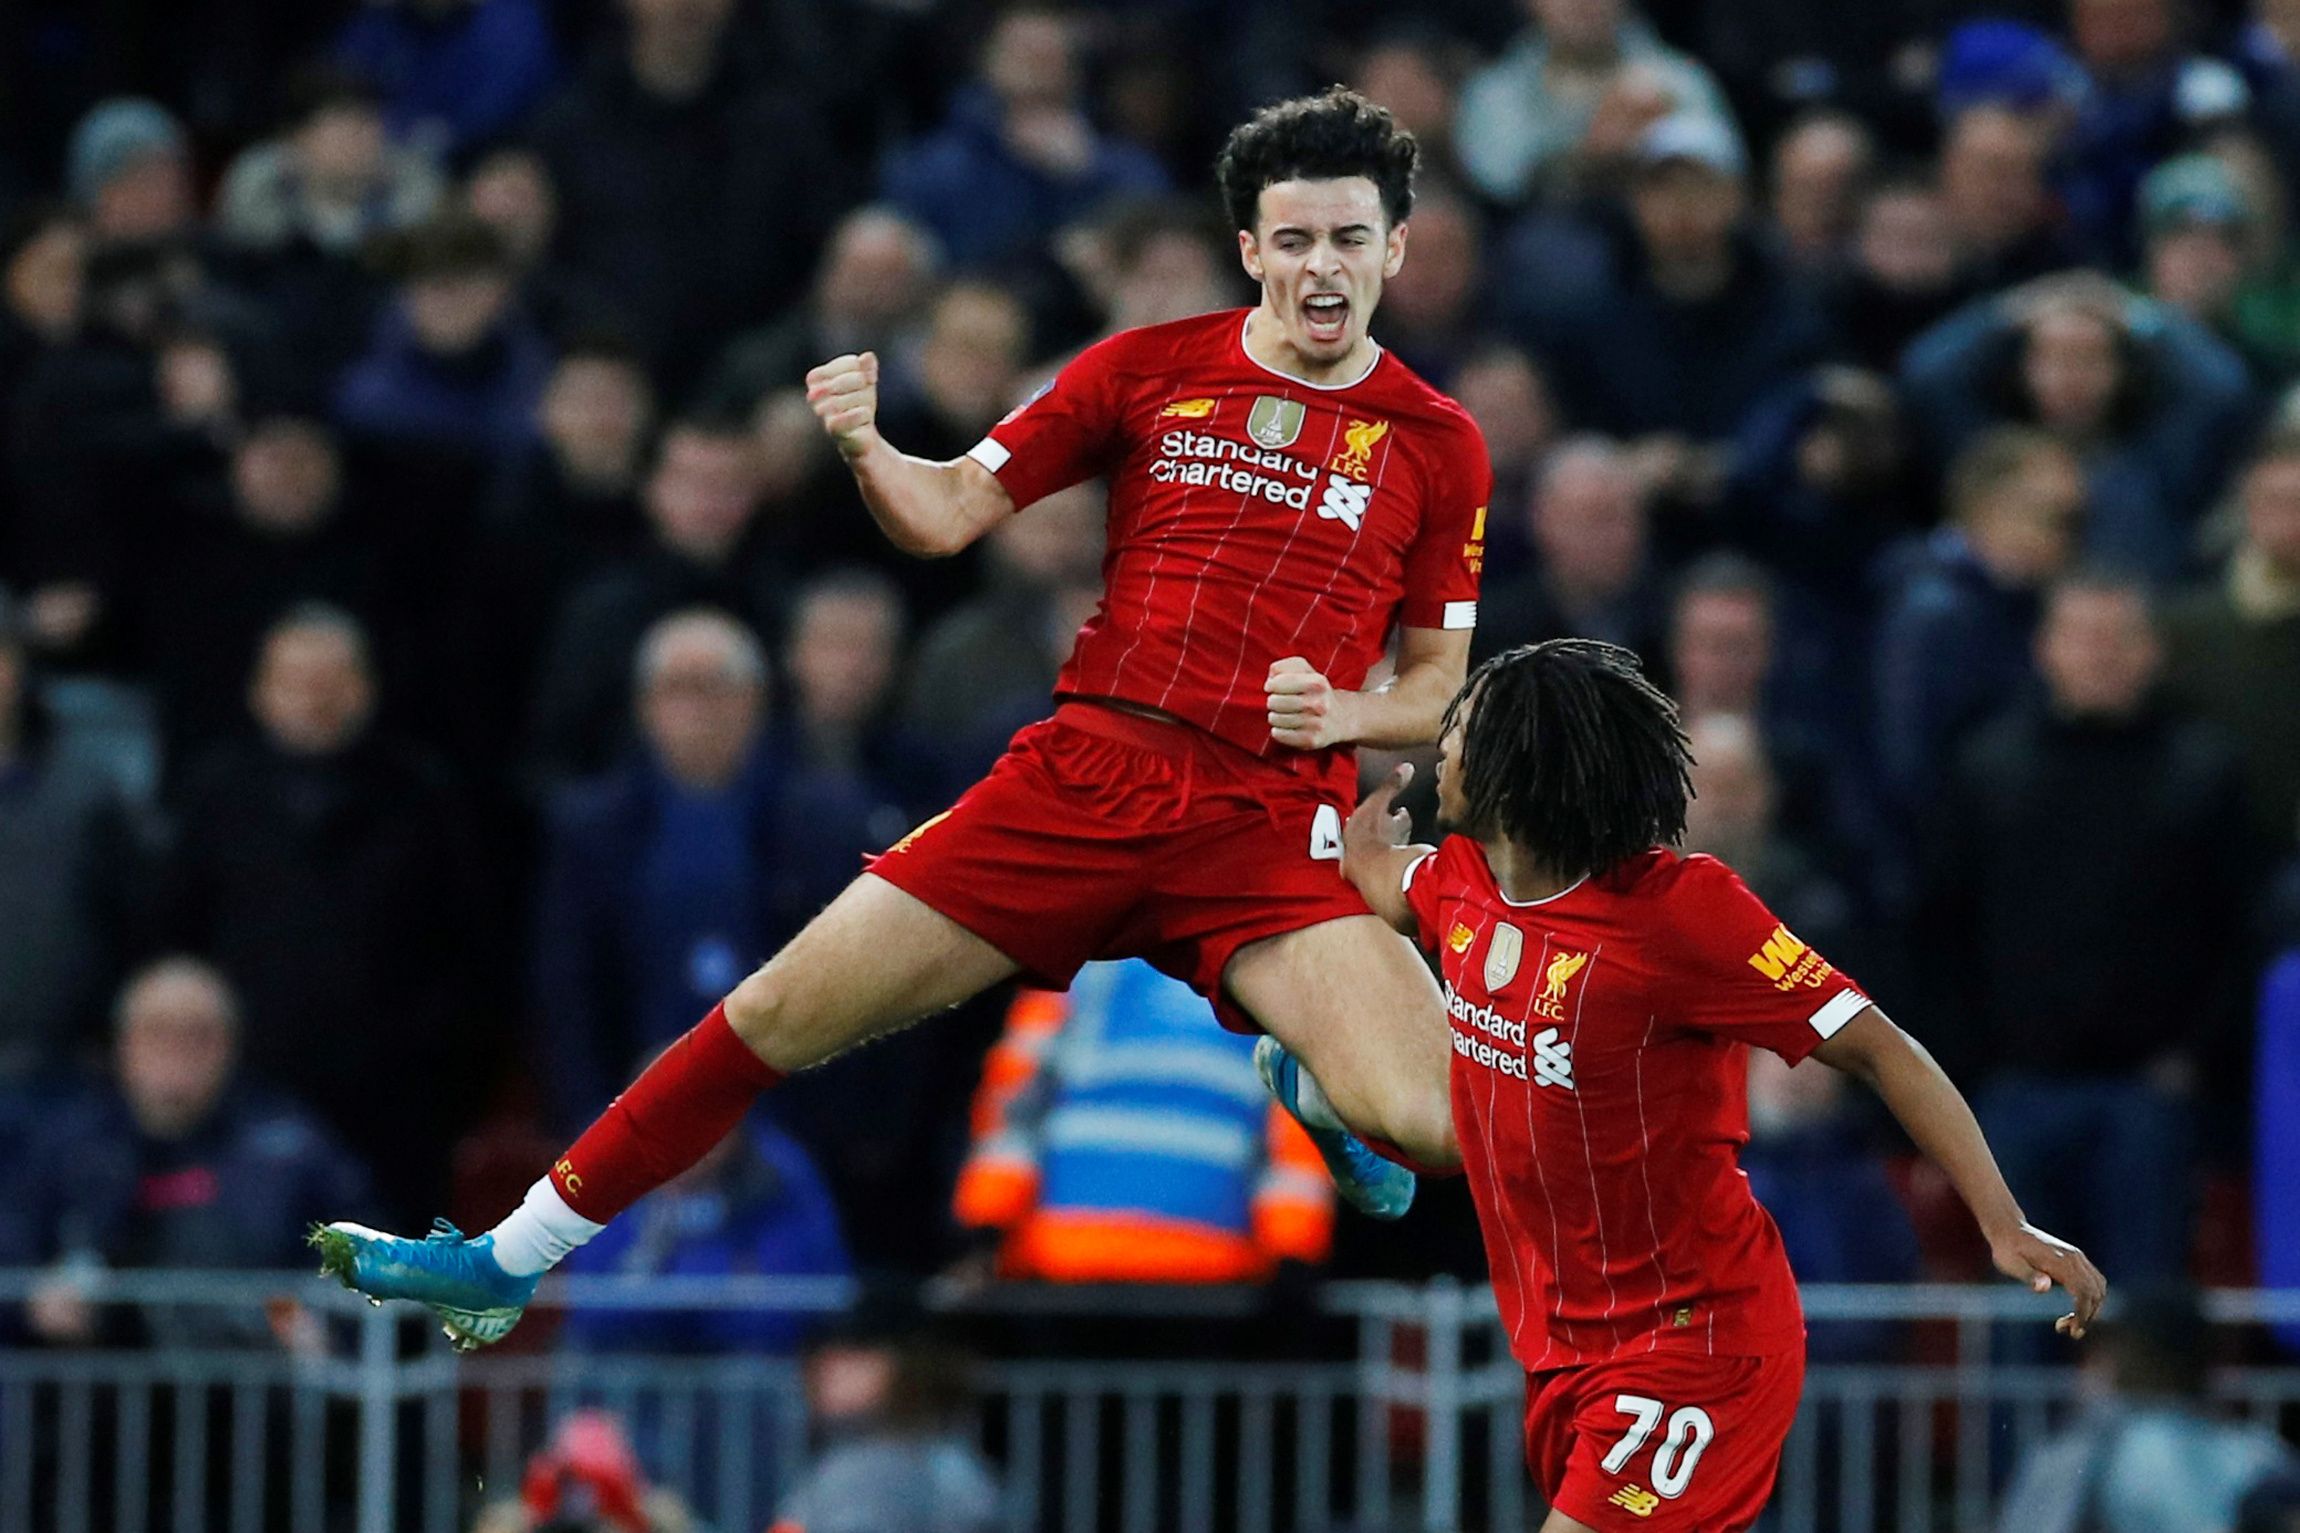 Soccer Football - FA Cup - Third Round - Liverpool v Everton - Anfield, Liverpool, Britain - January 5, 2020  Liverpool's Curtis Jones celebrates scoring their first goal with teammate Yasser Larouci   REUTERS/Phil Noble